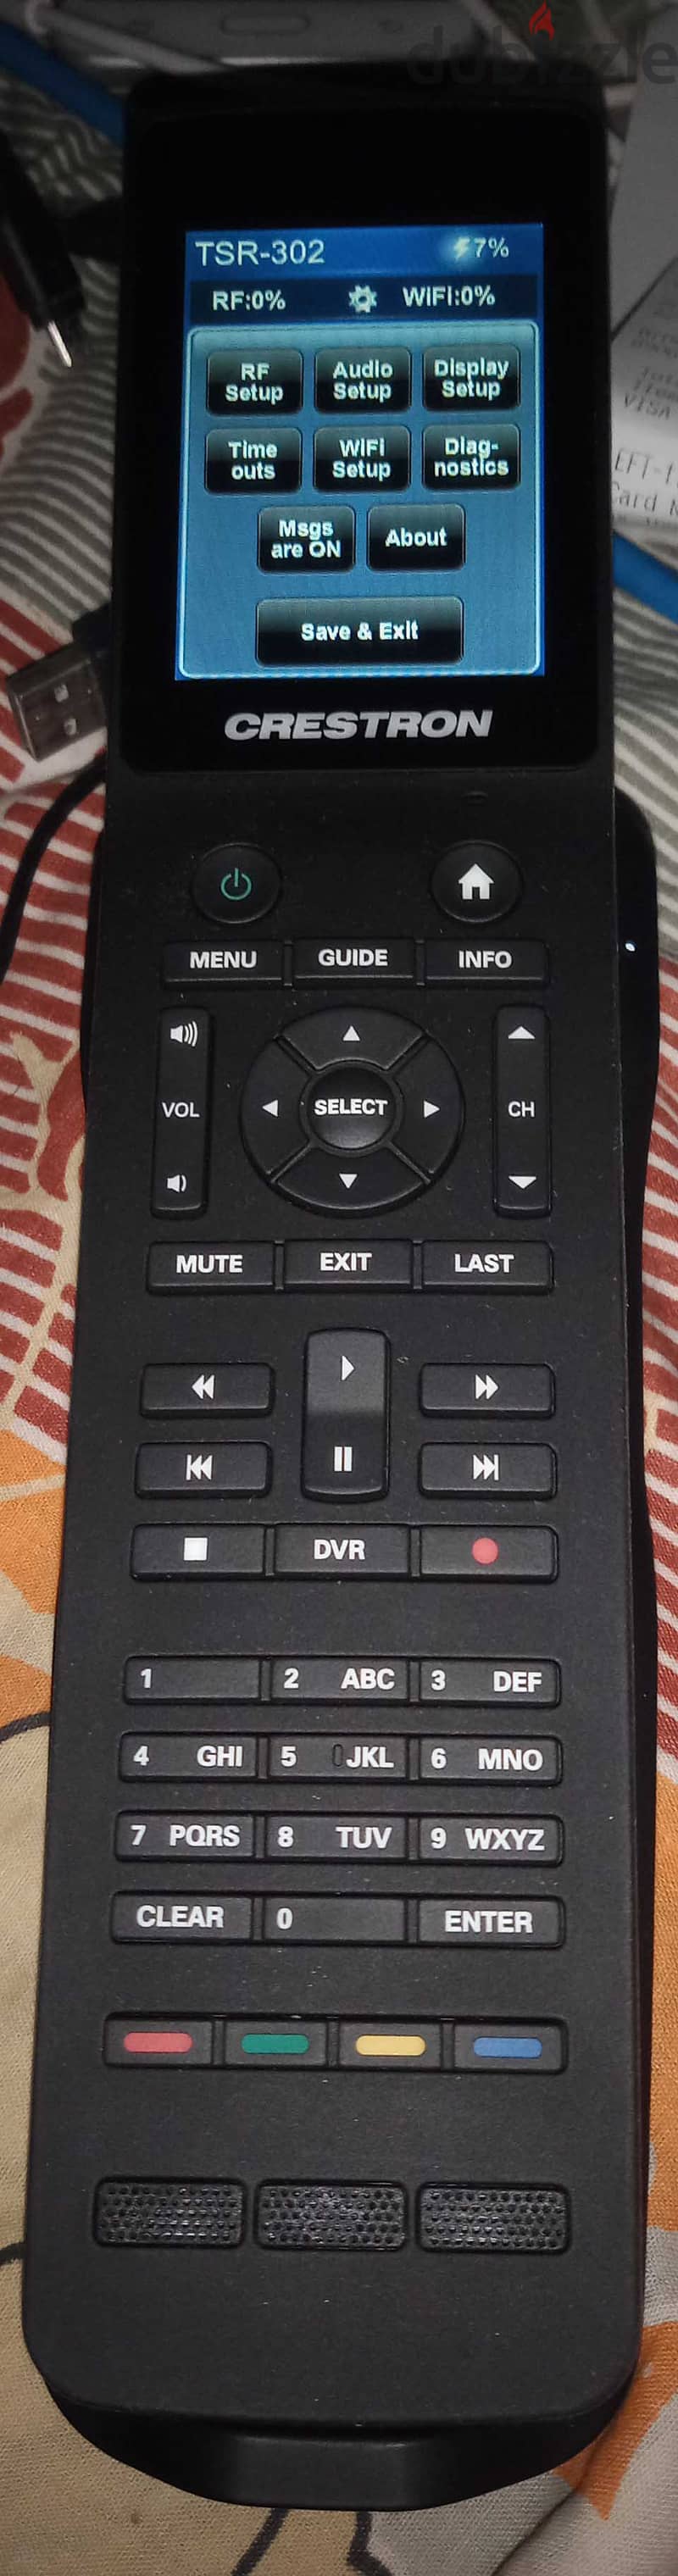 Crestron Handheld touch screen remote 0